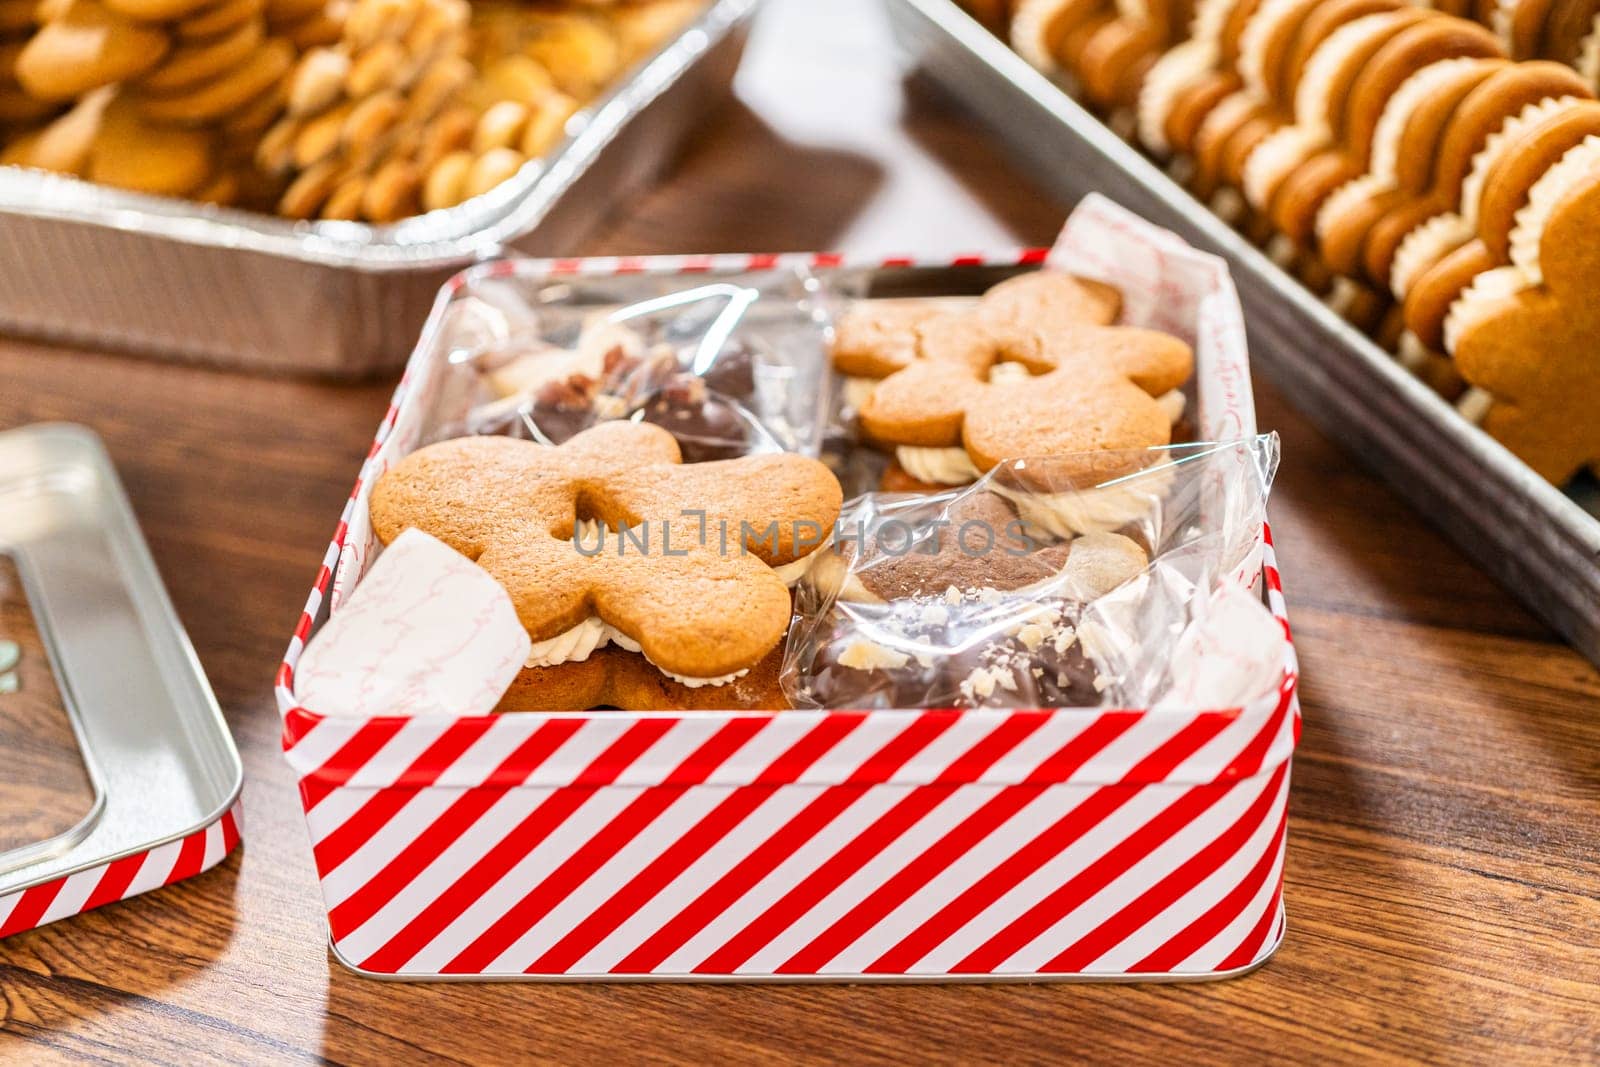 Lovingly homemade gingerbread and sugar cookies, half-dipped in rich chocolate, nestled in decorative Christmas tin boxes perfect for seasonal gifting.